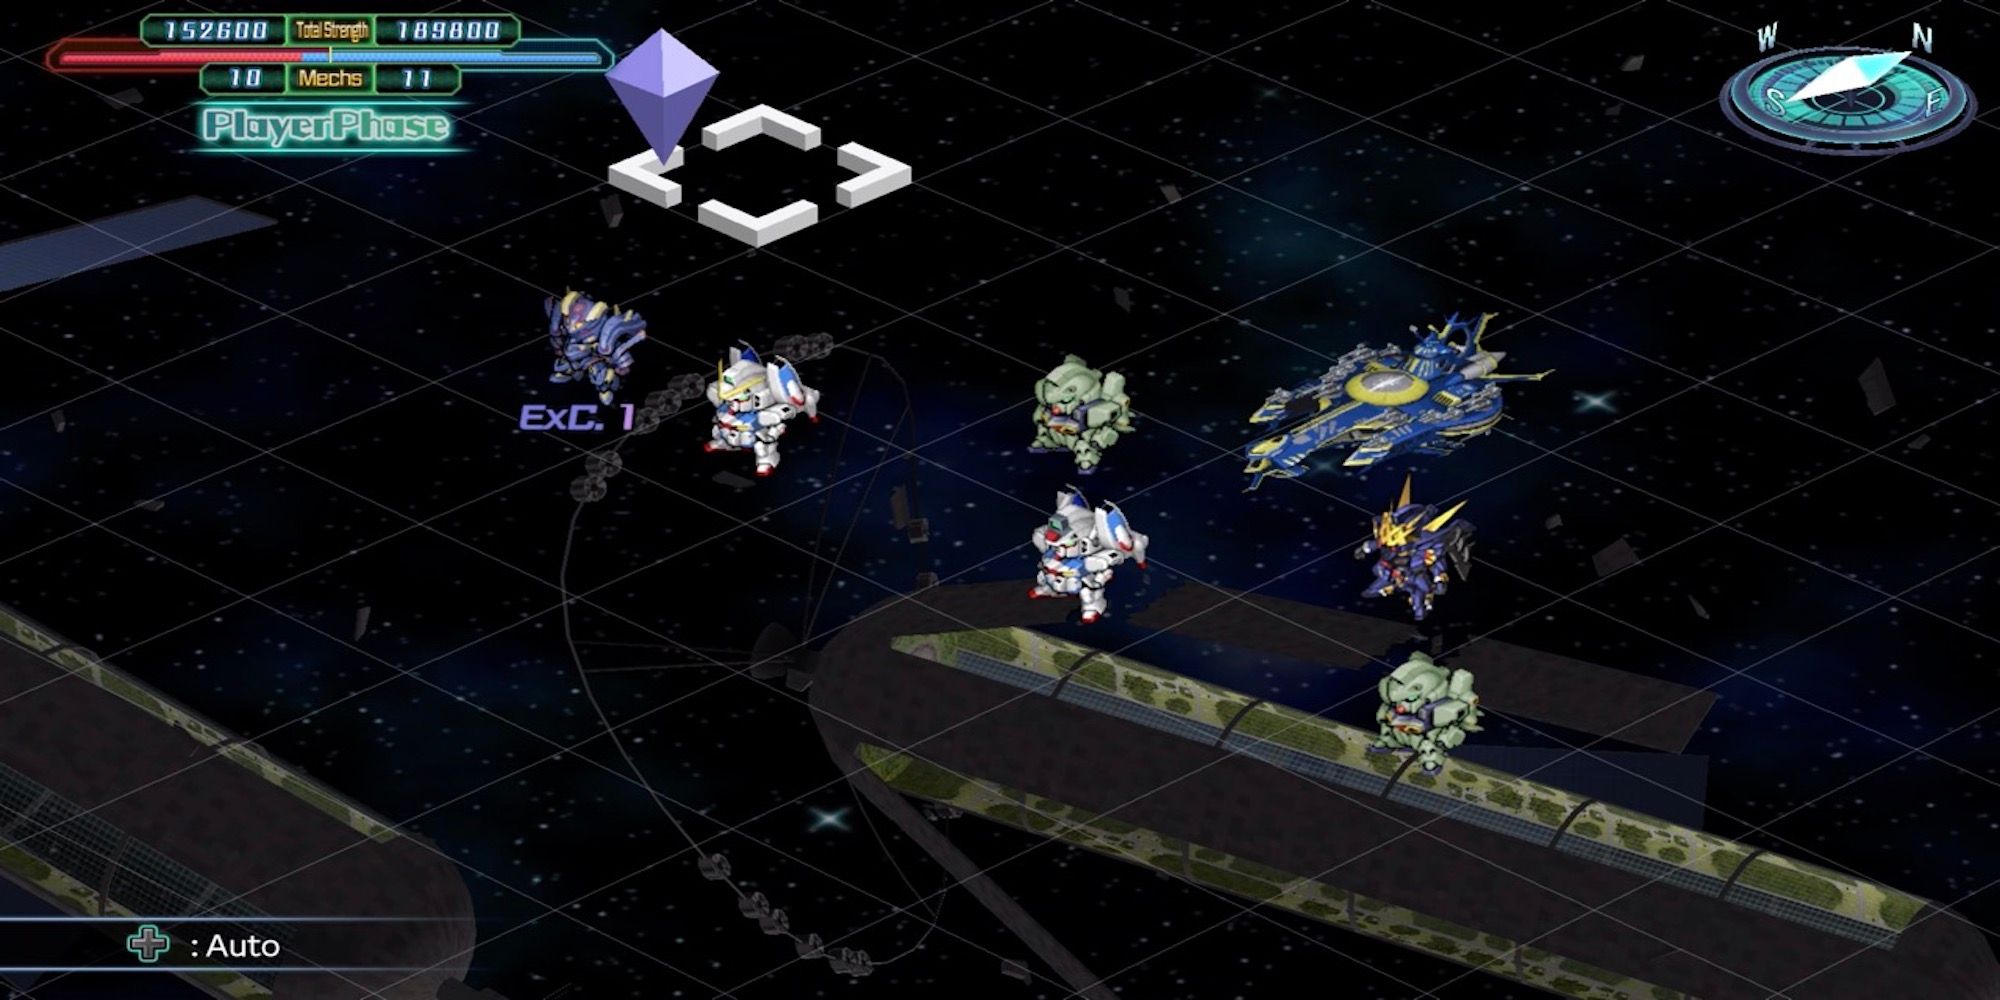 Placing units on the map in Super Robot Wars 30